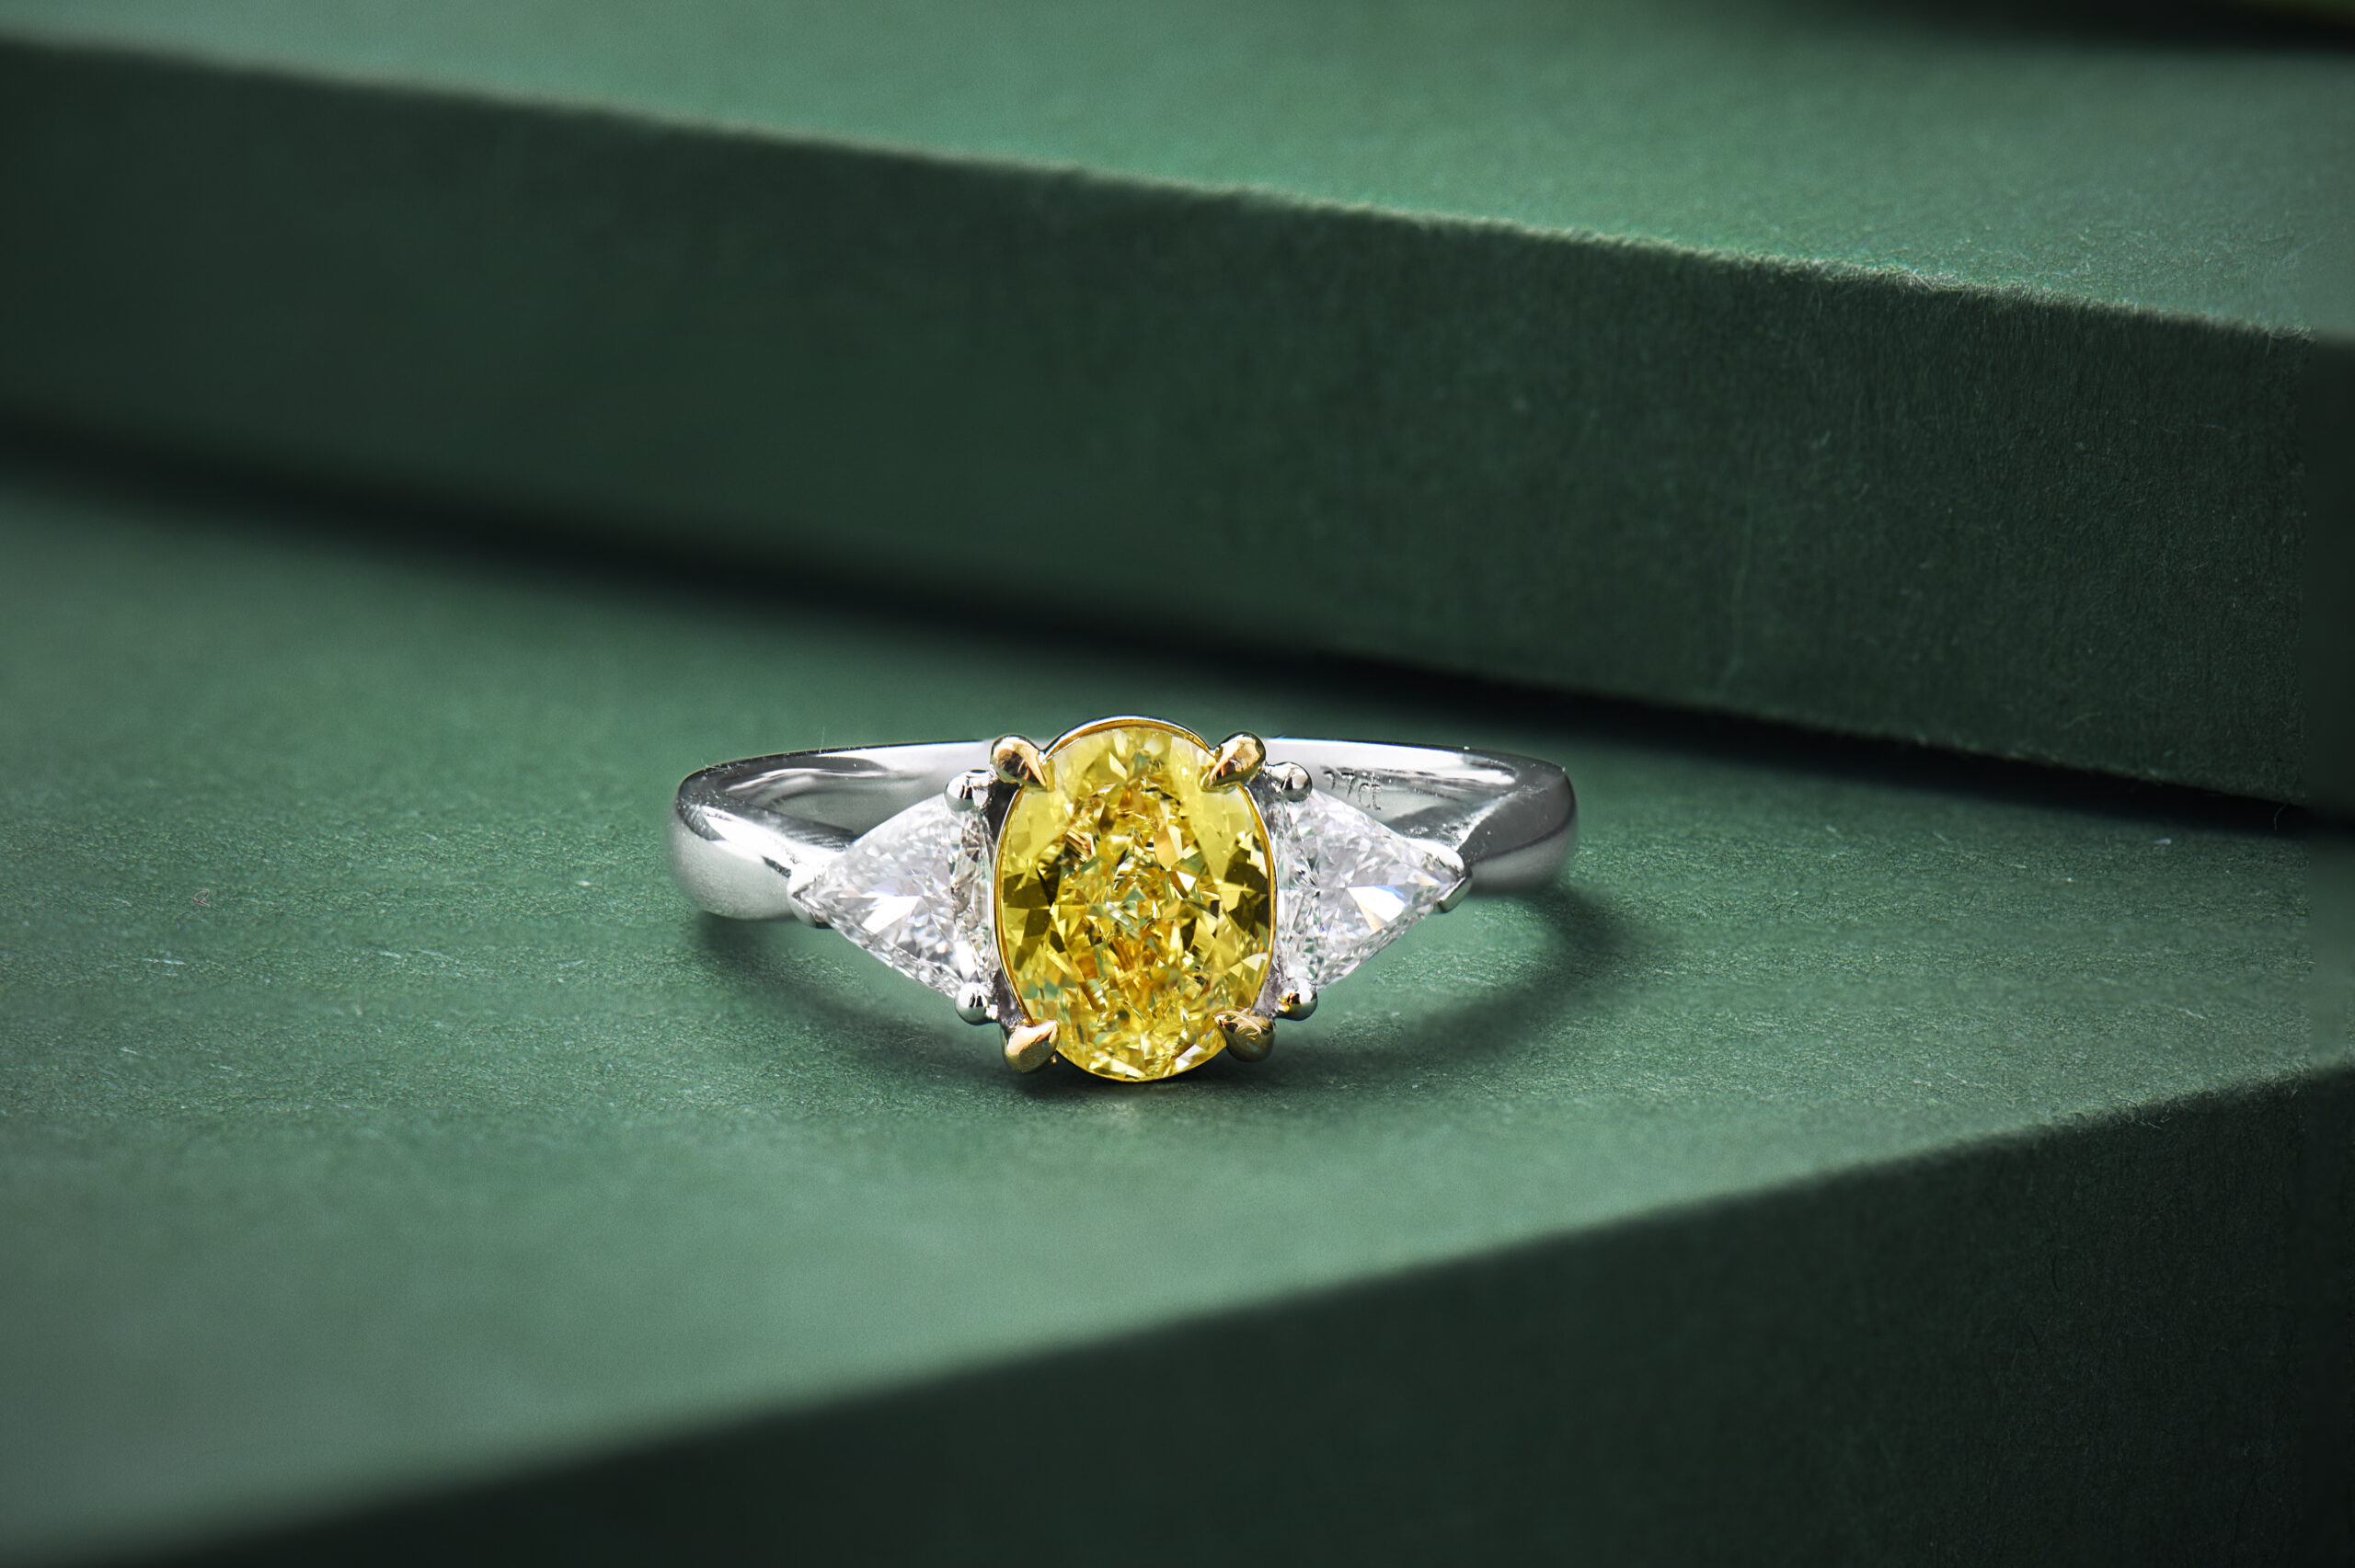 How Much Is A Yellow Diamond Worth